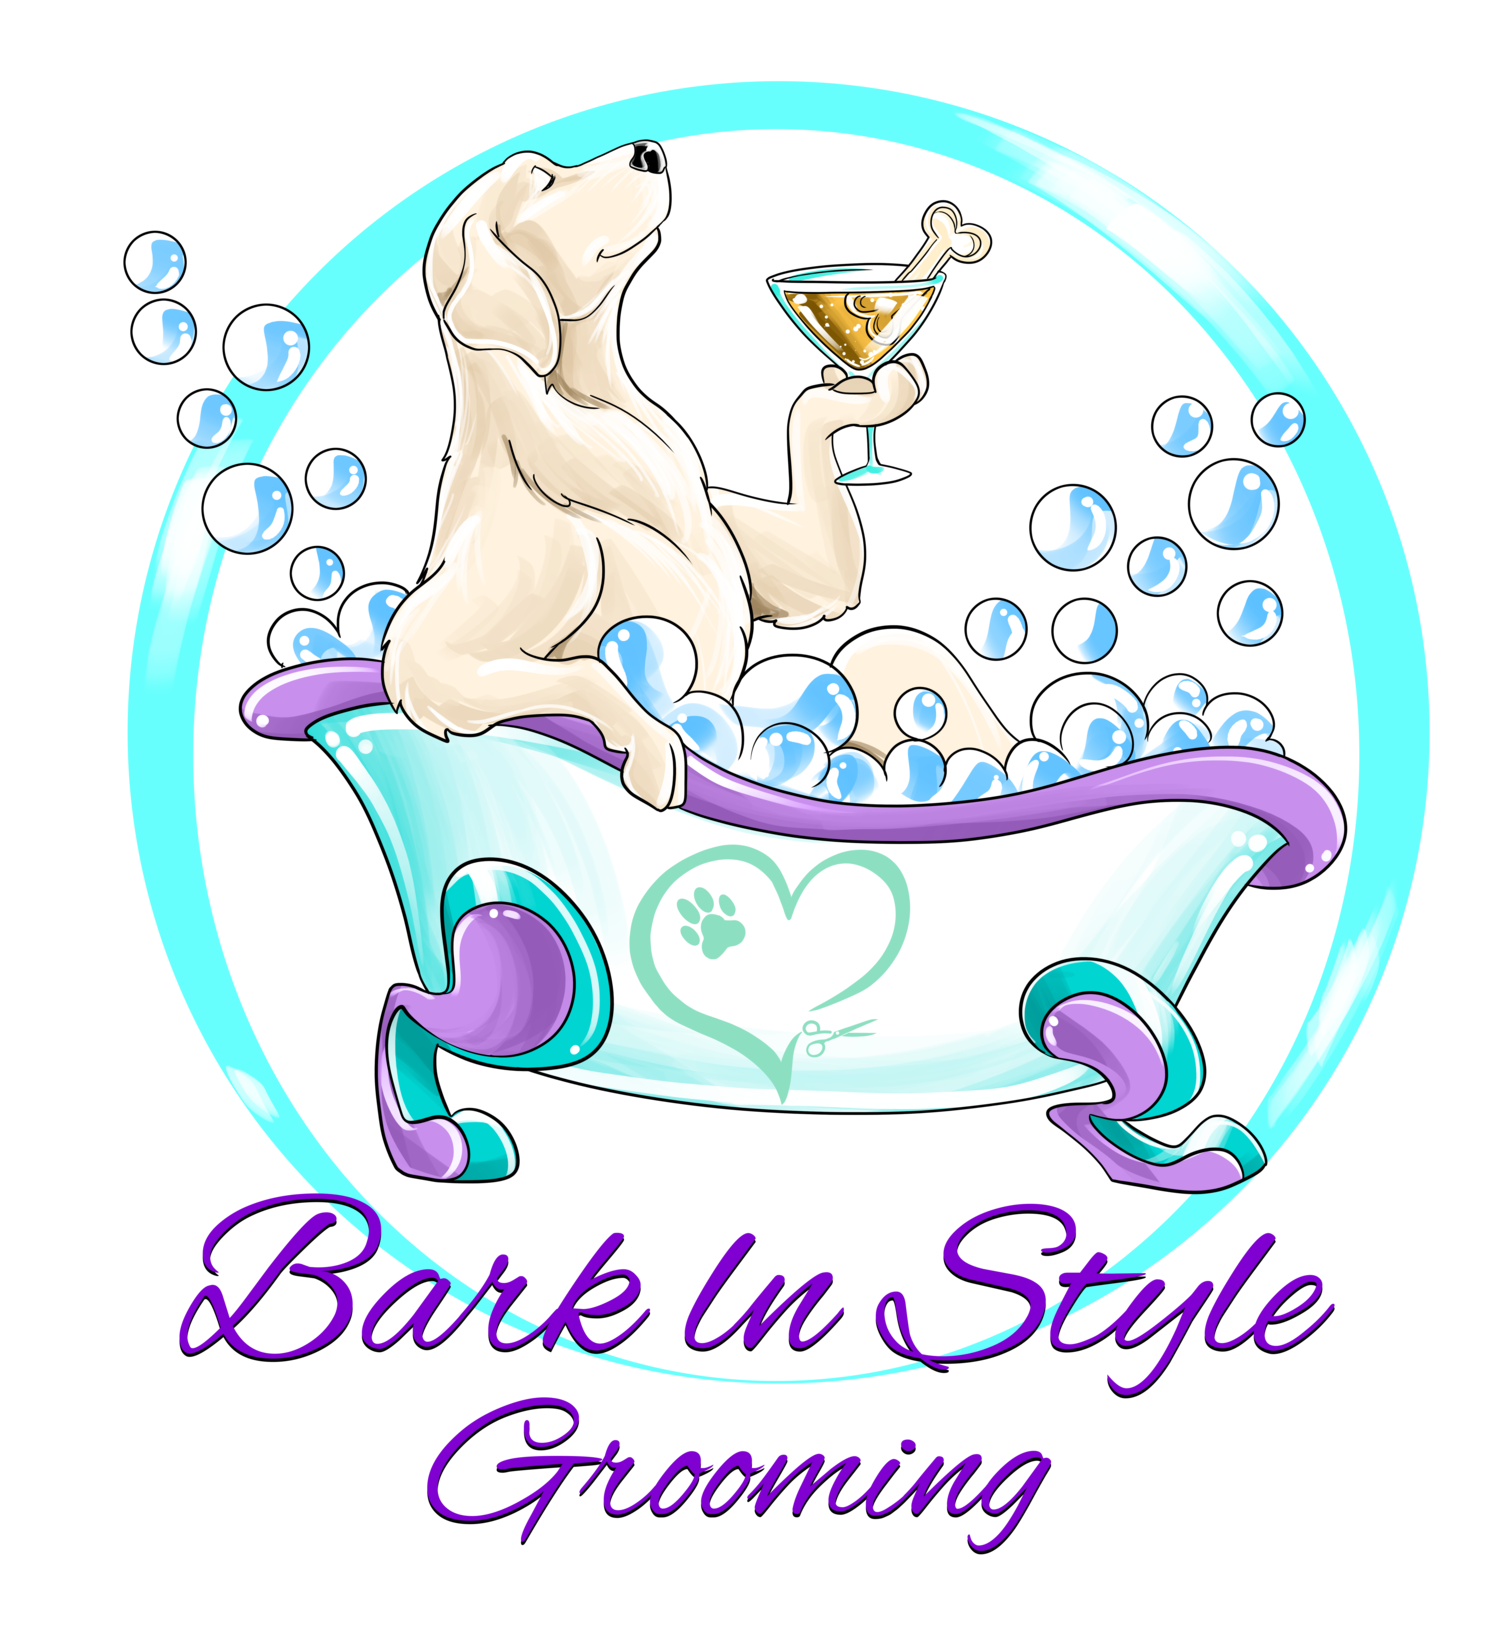 Bark In Style Grooming &amp; Yappy Hour Pet Treats